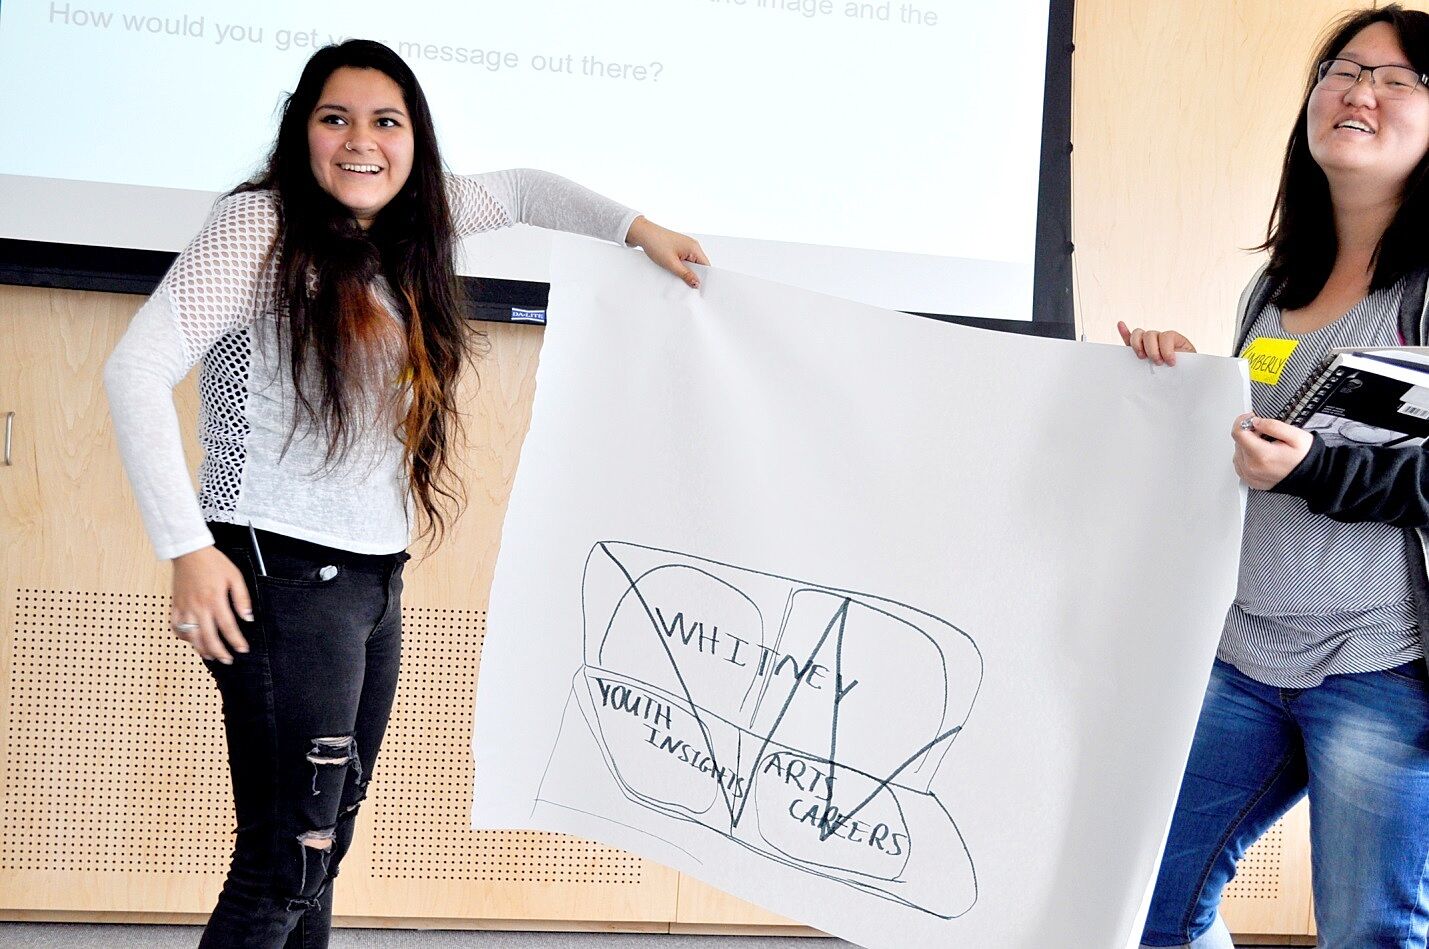 Two teens show off their Whitney logo ideas on a poster.